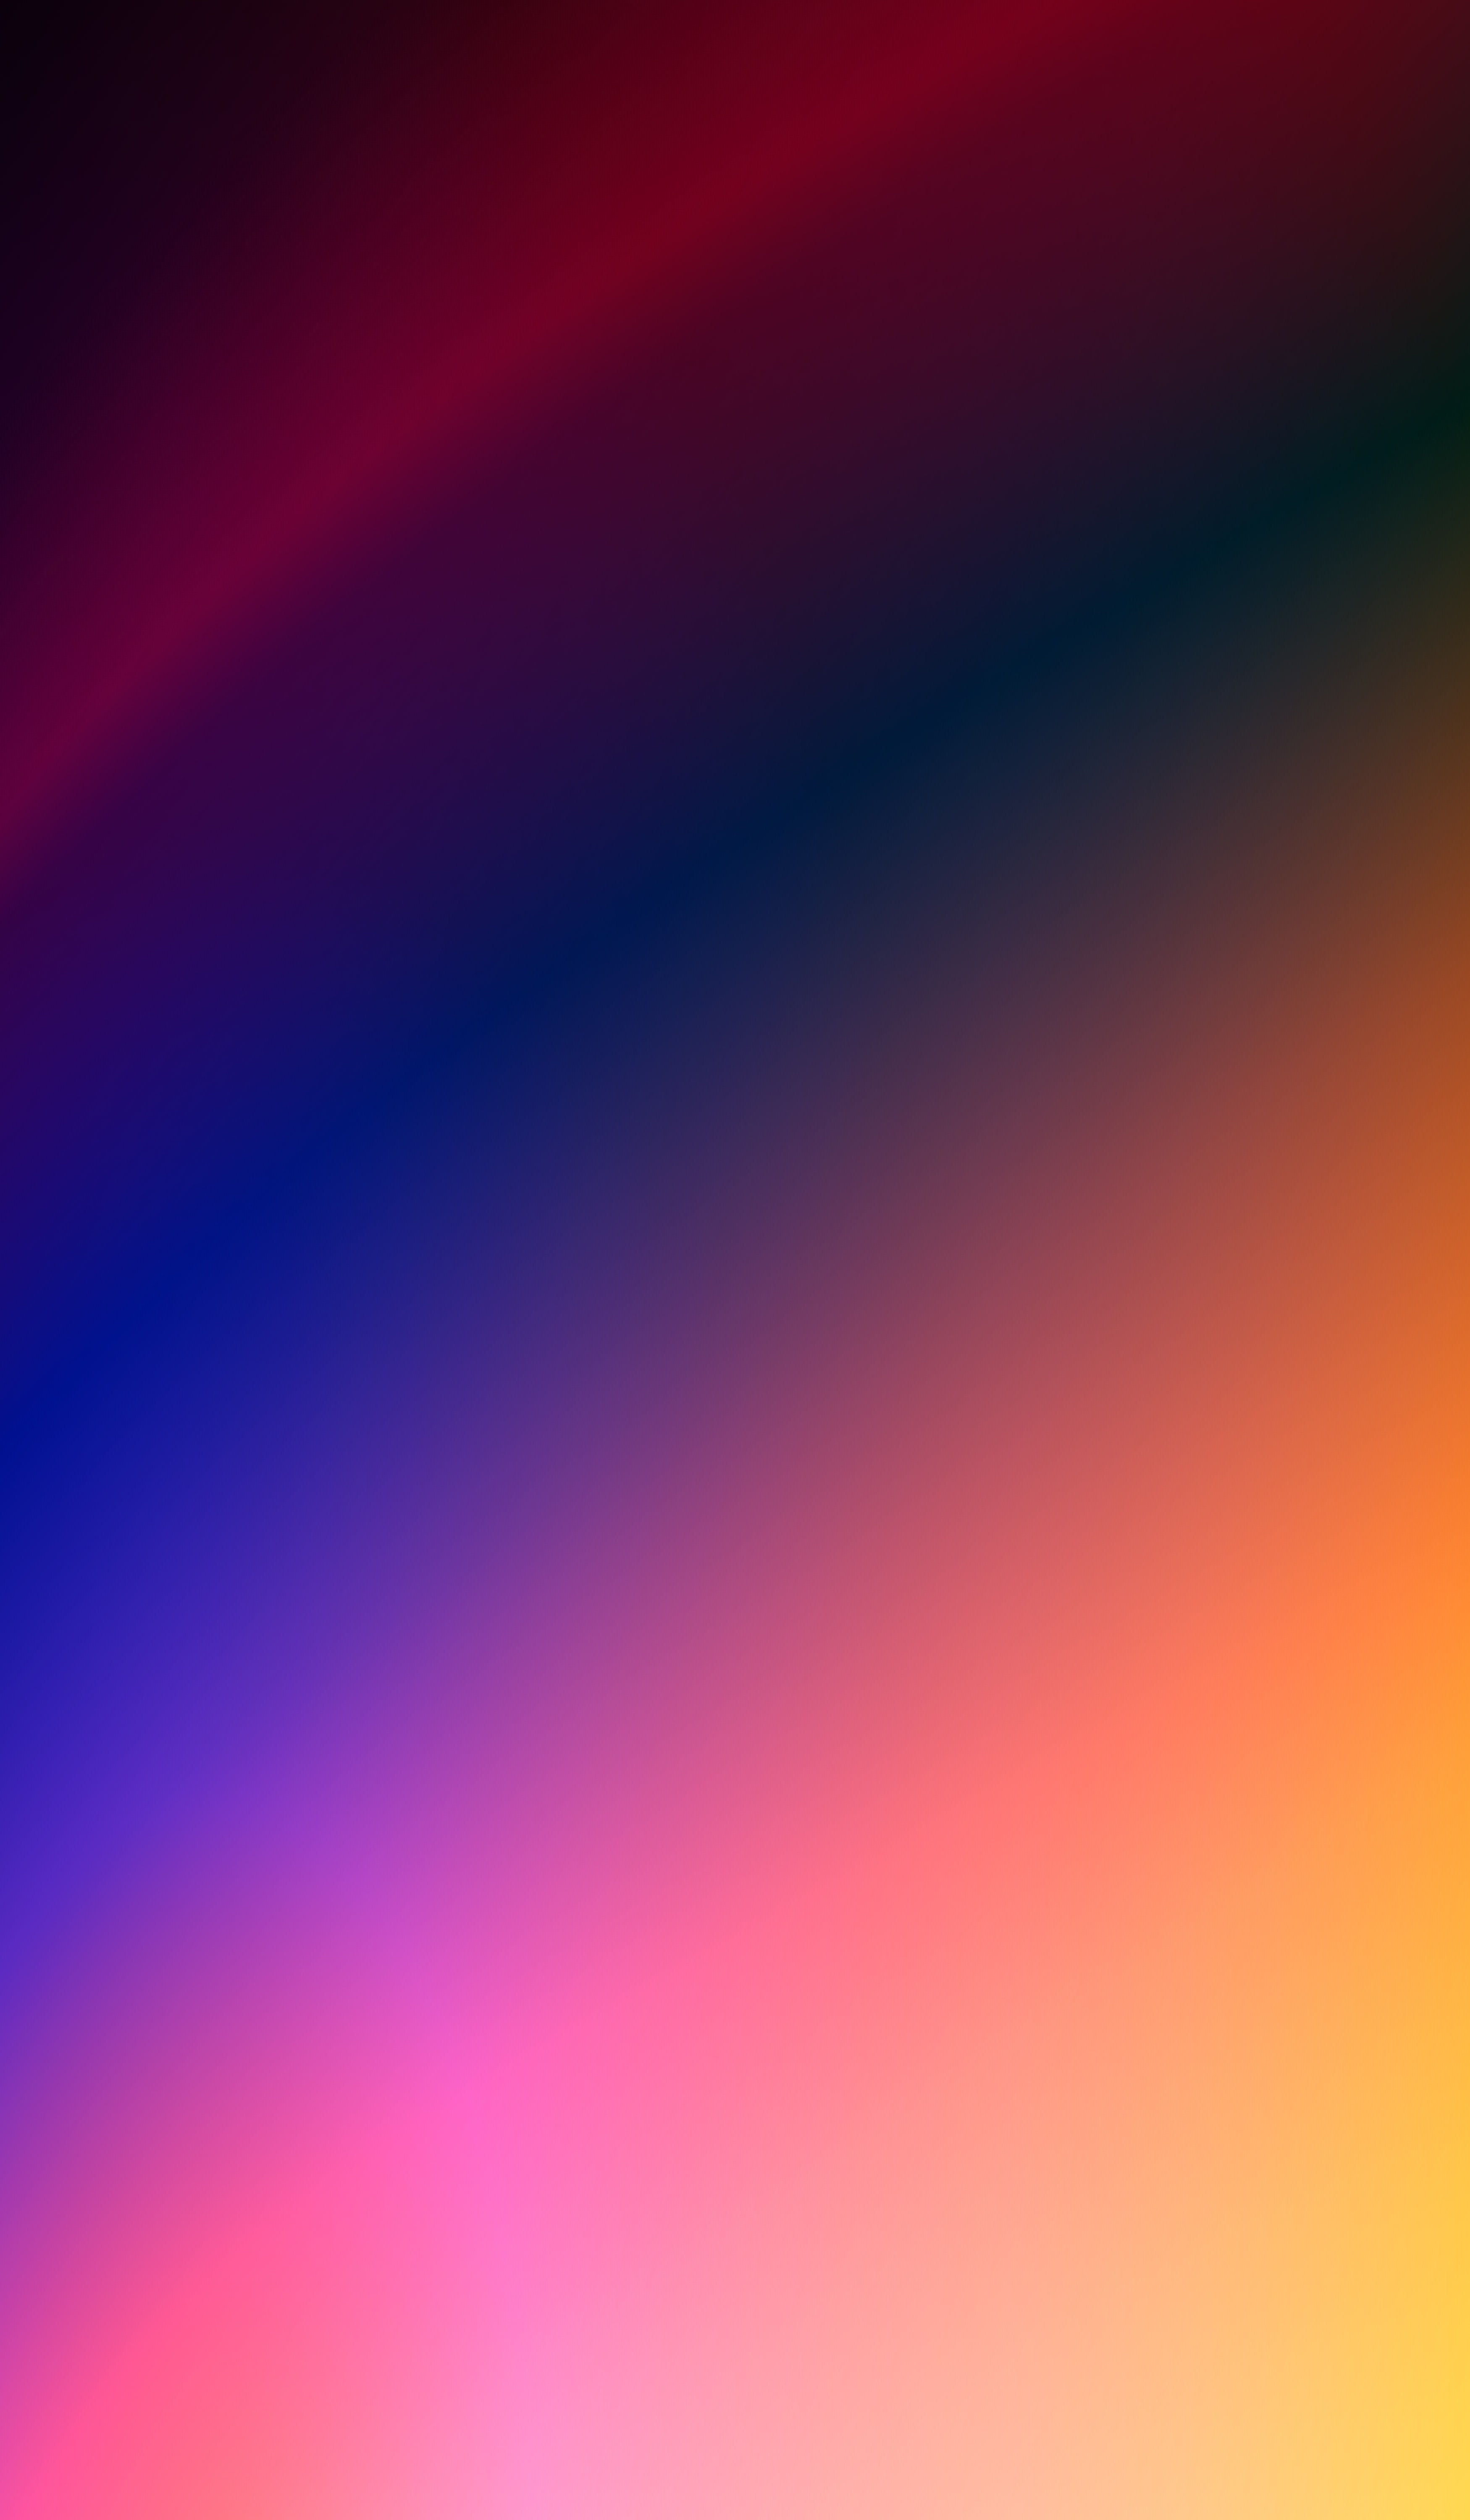 gradient, abstract, shine, light, multicolored, motley, blur, smooth